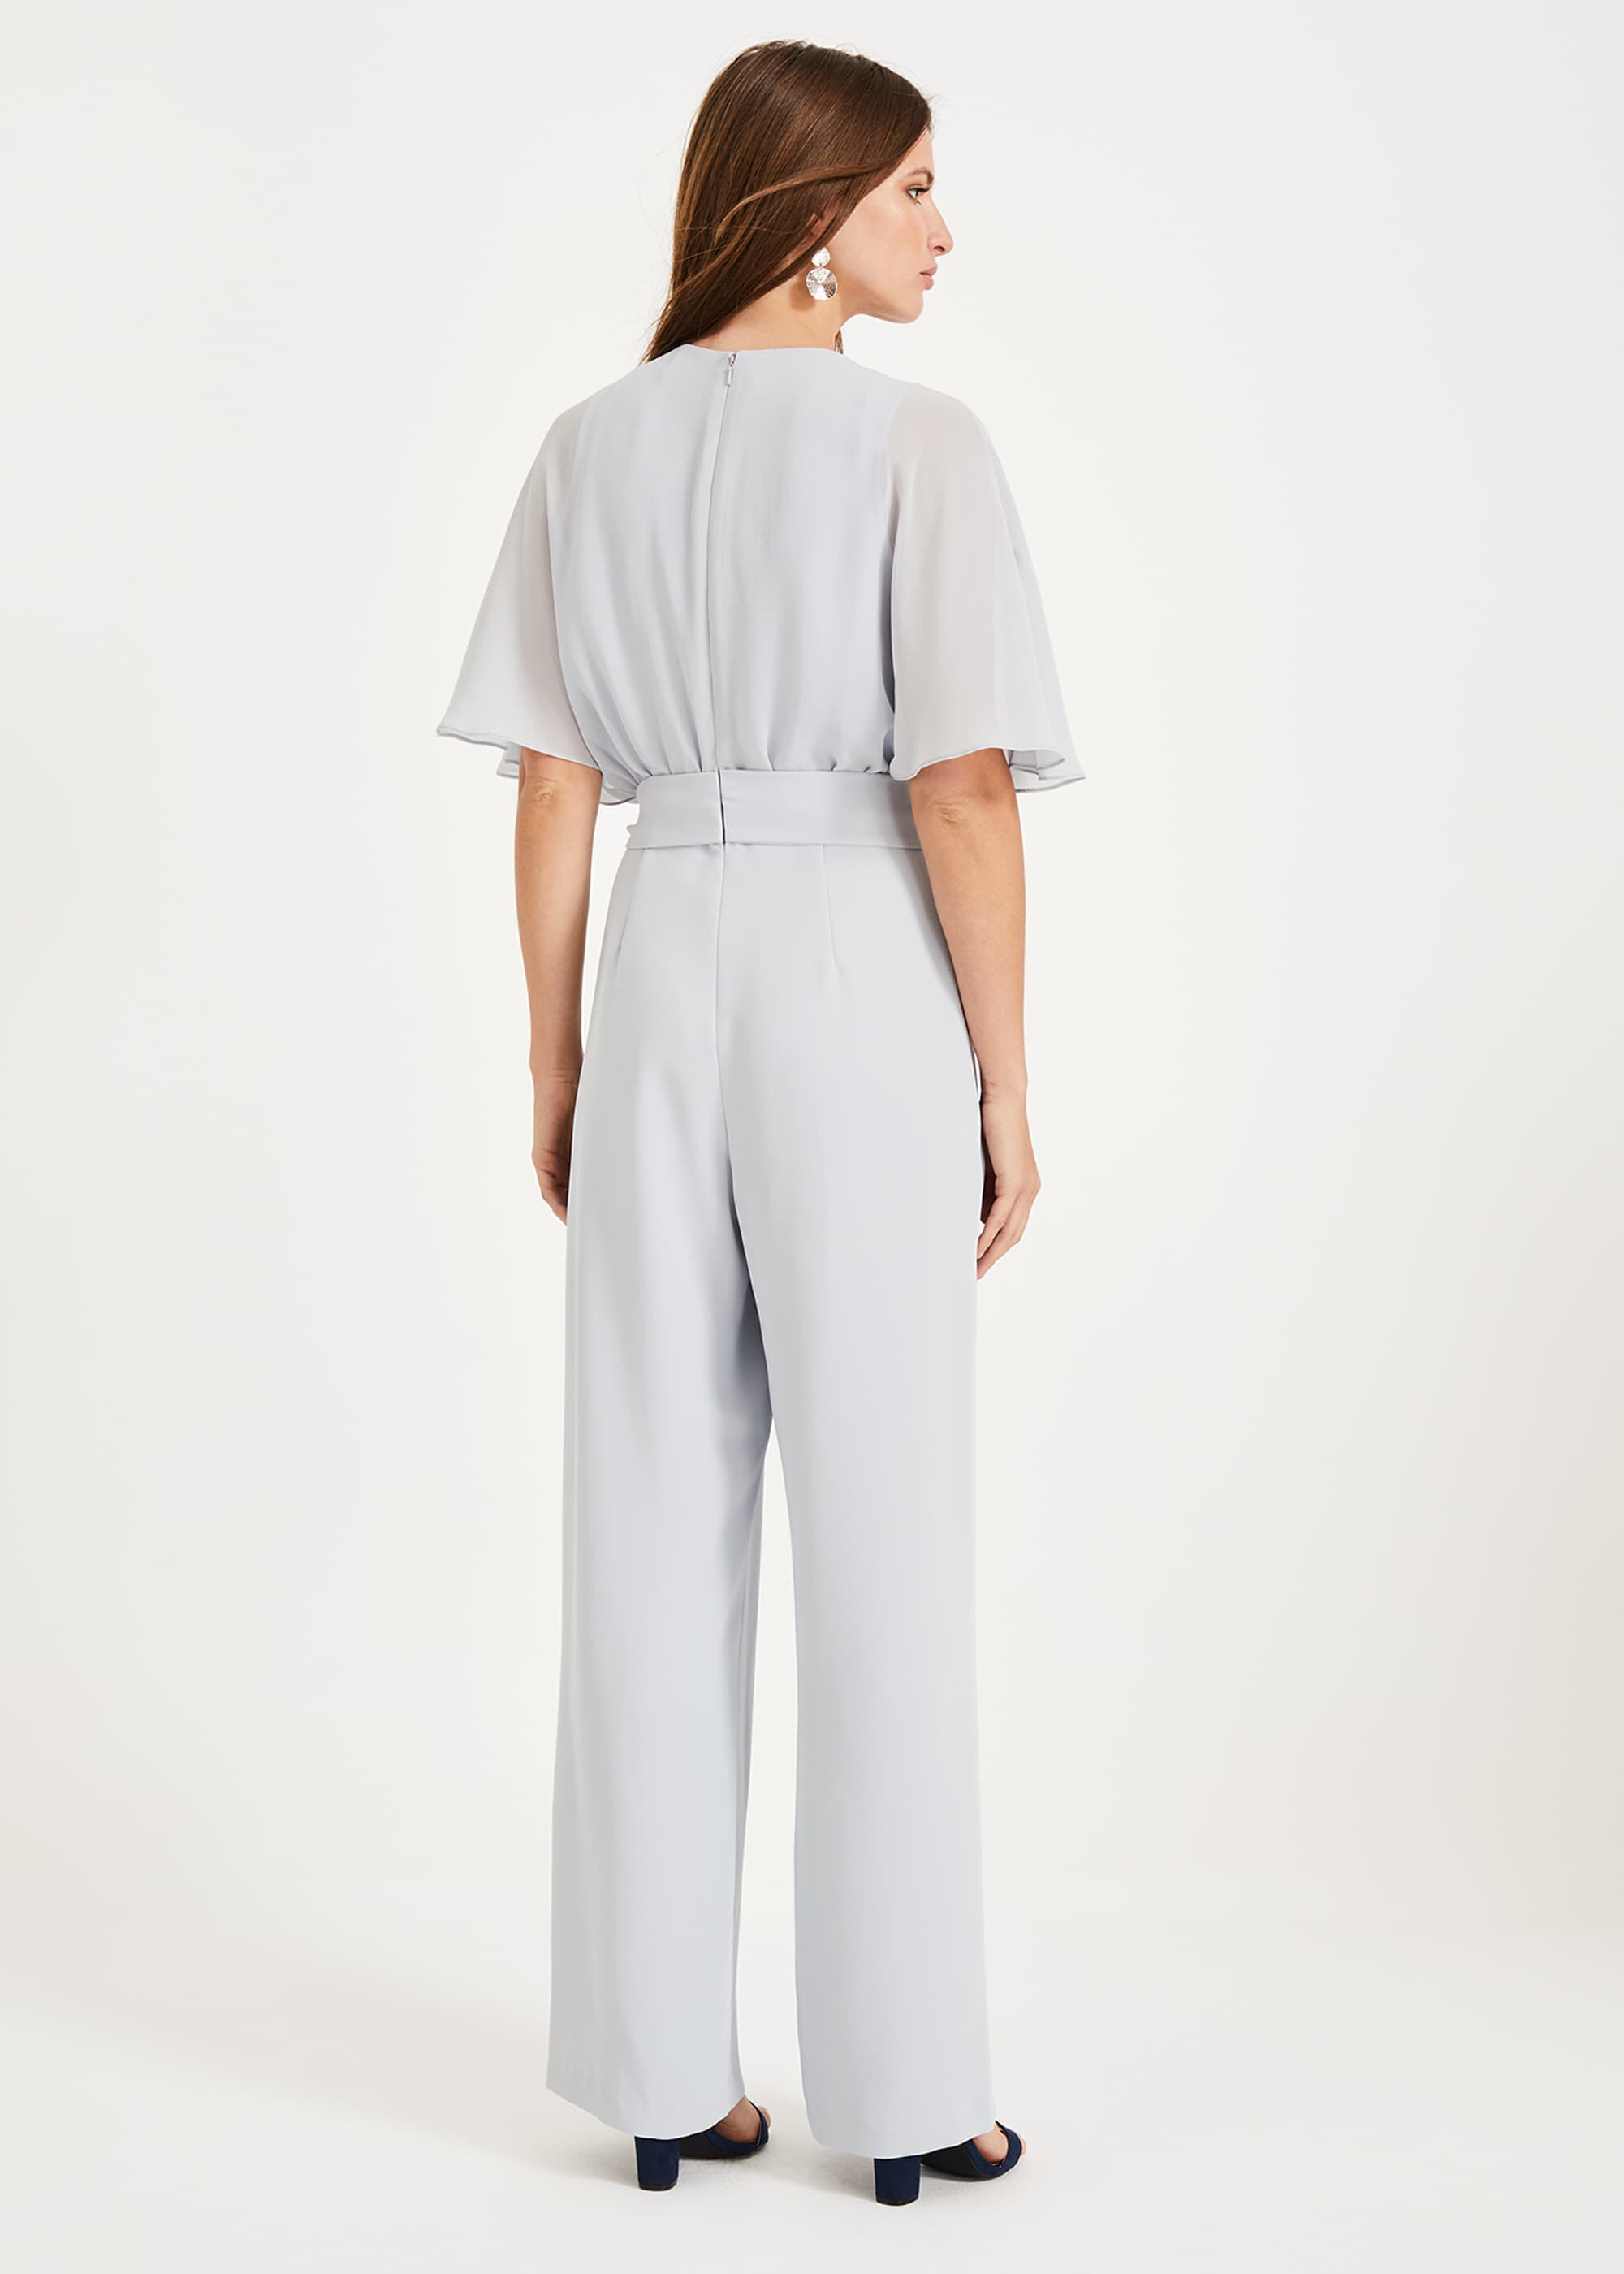 Womens Clothing Jumpsuits and rompers Full-length jumpsuits and rompers Phase Eight s Munroe Georgette Jumpsuit 